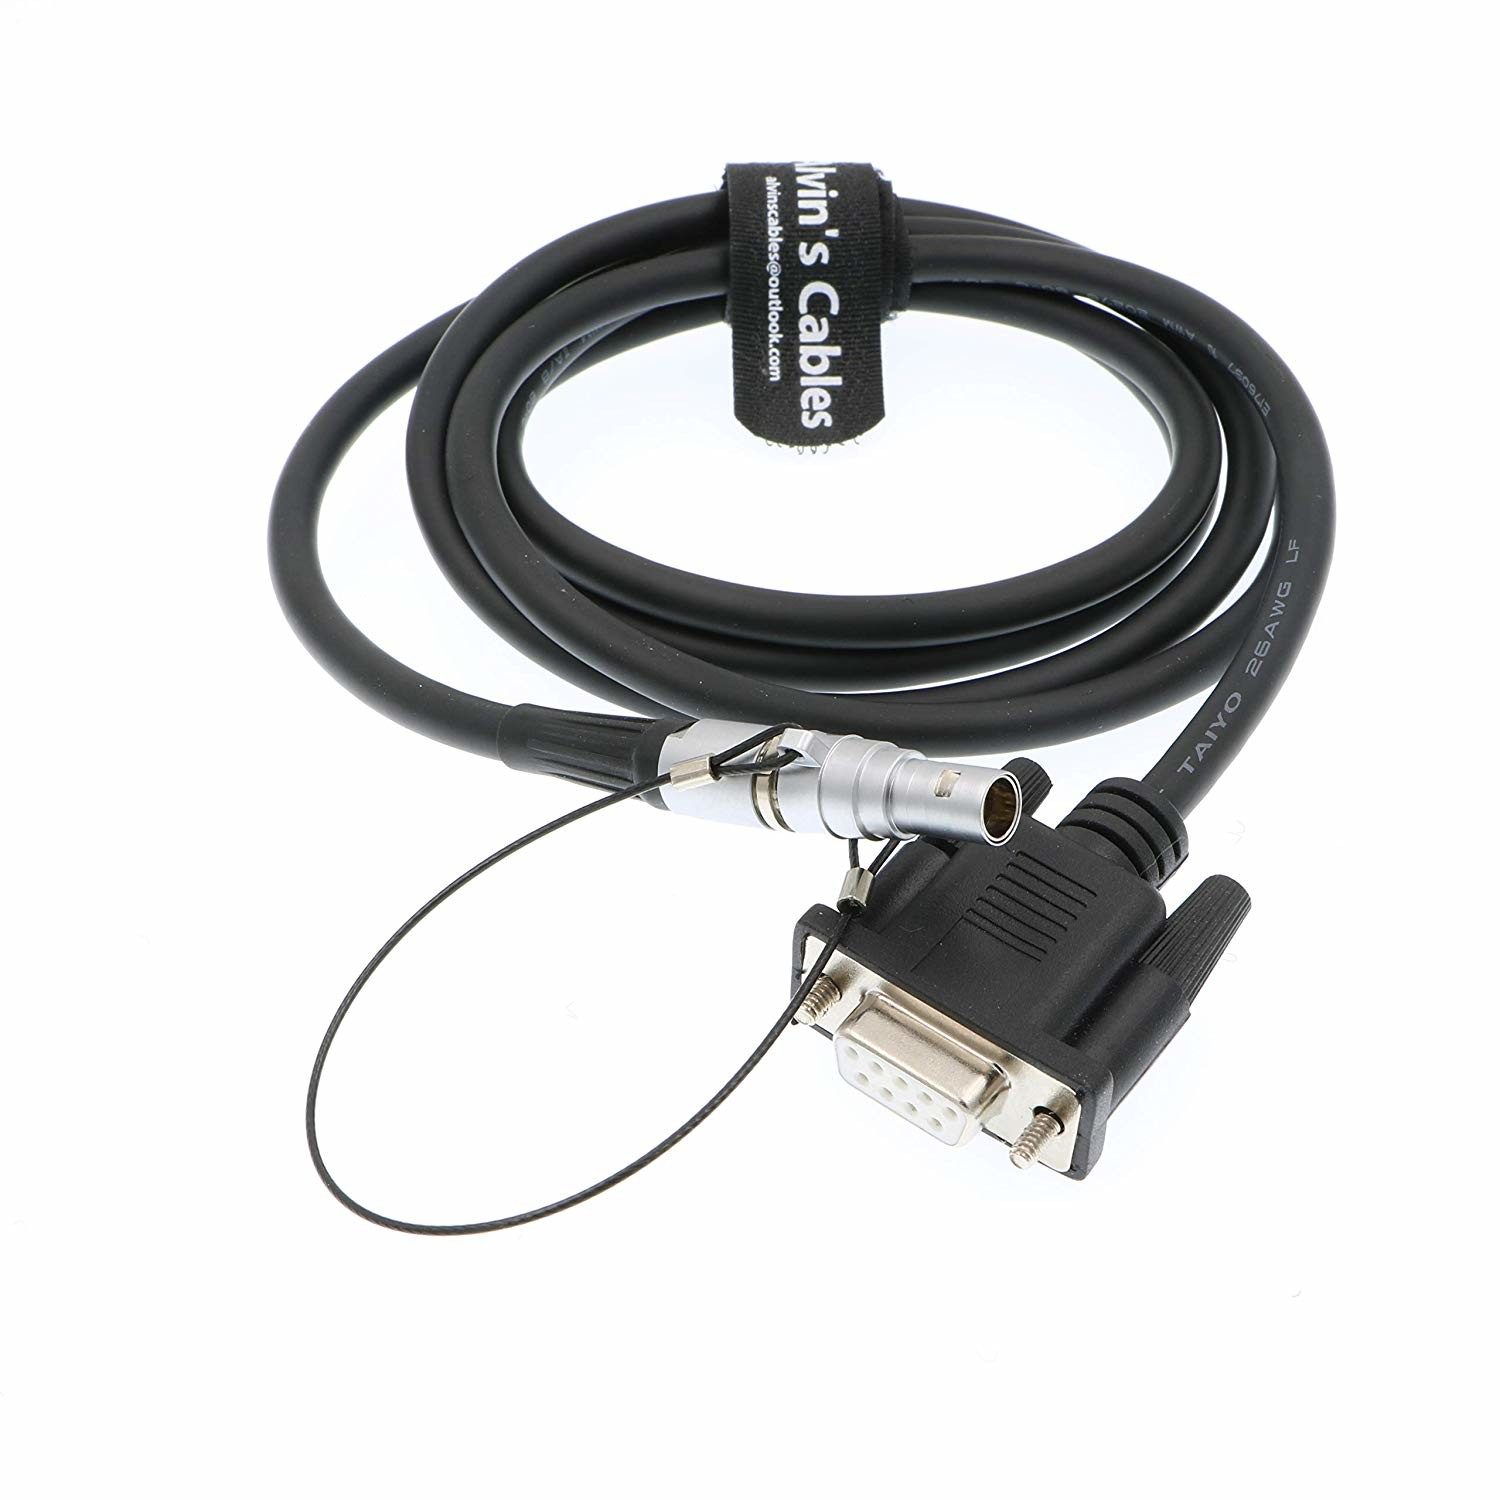 Wholesale Trimble GPS power cable GPS Frequency Modulation 32960 5700 5800 R7 R8 TSC1 from china suppliers